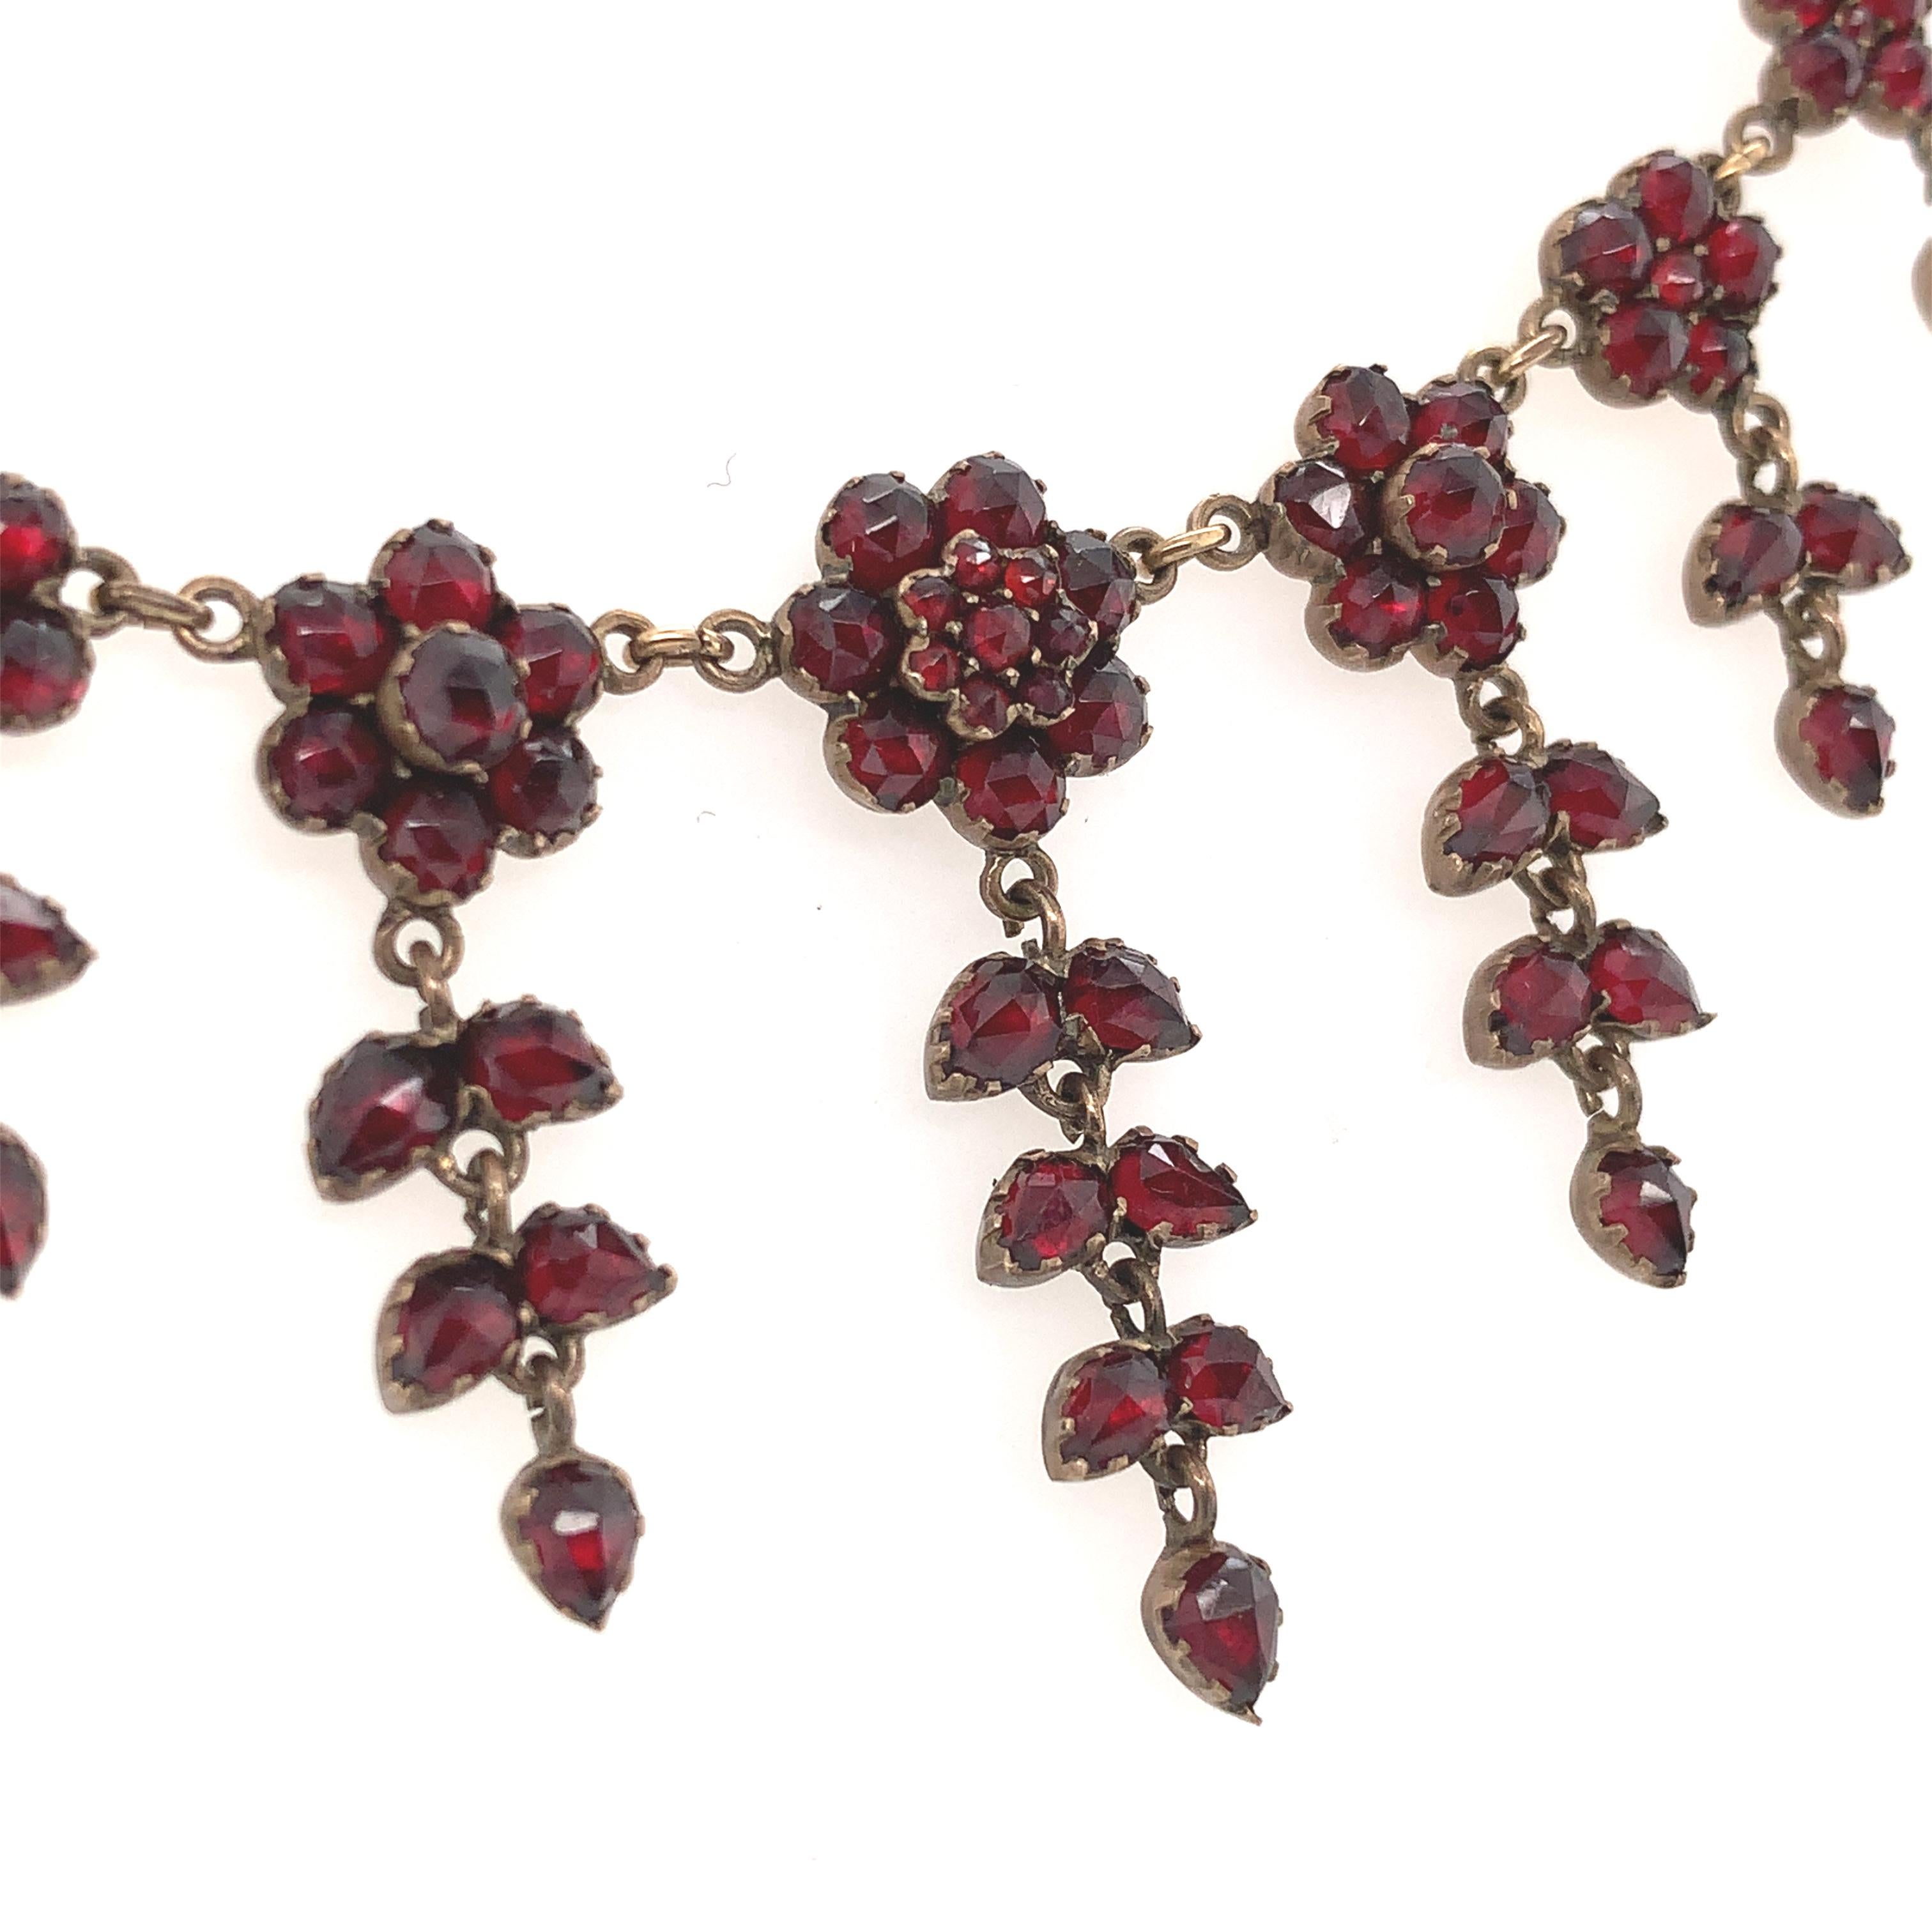 Bohemian Garnet Necklace with 7 drops  In Good Condition For Sale In Big Bend, WI